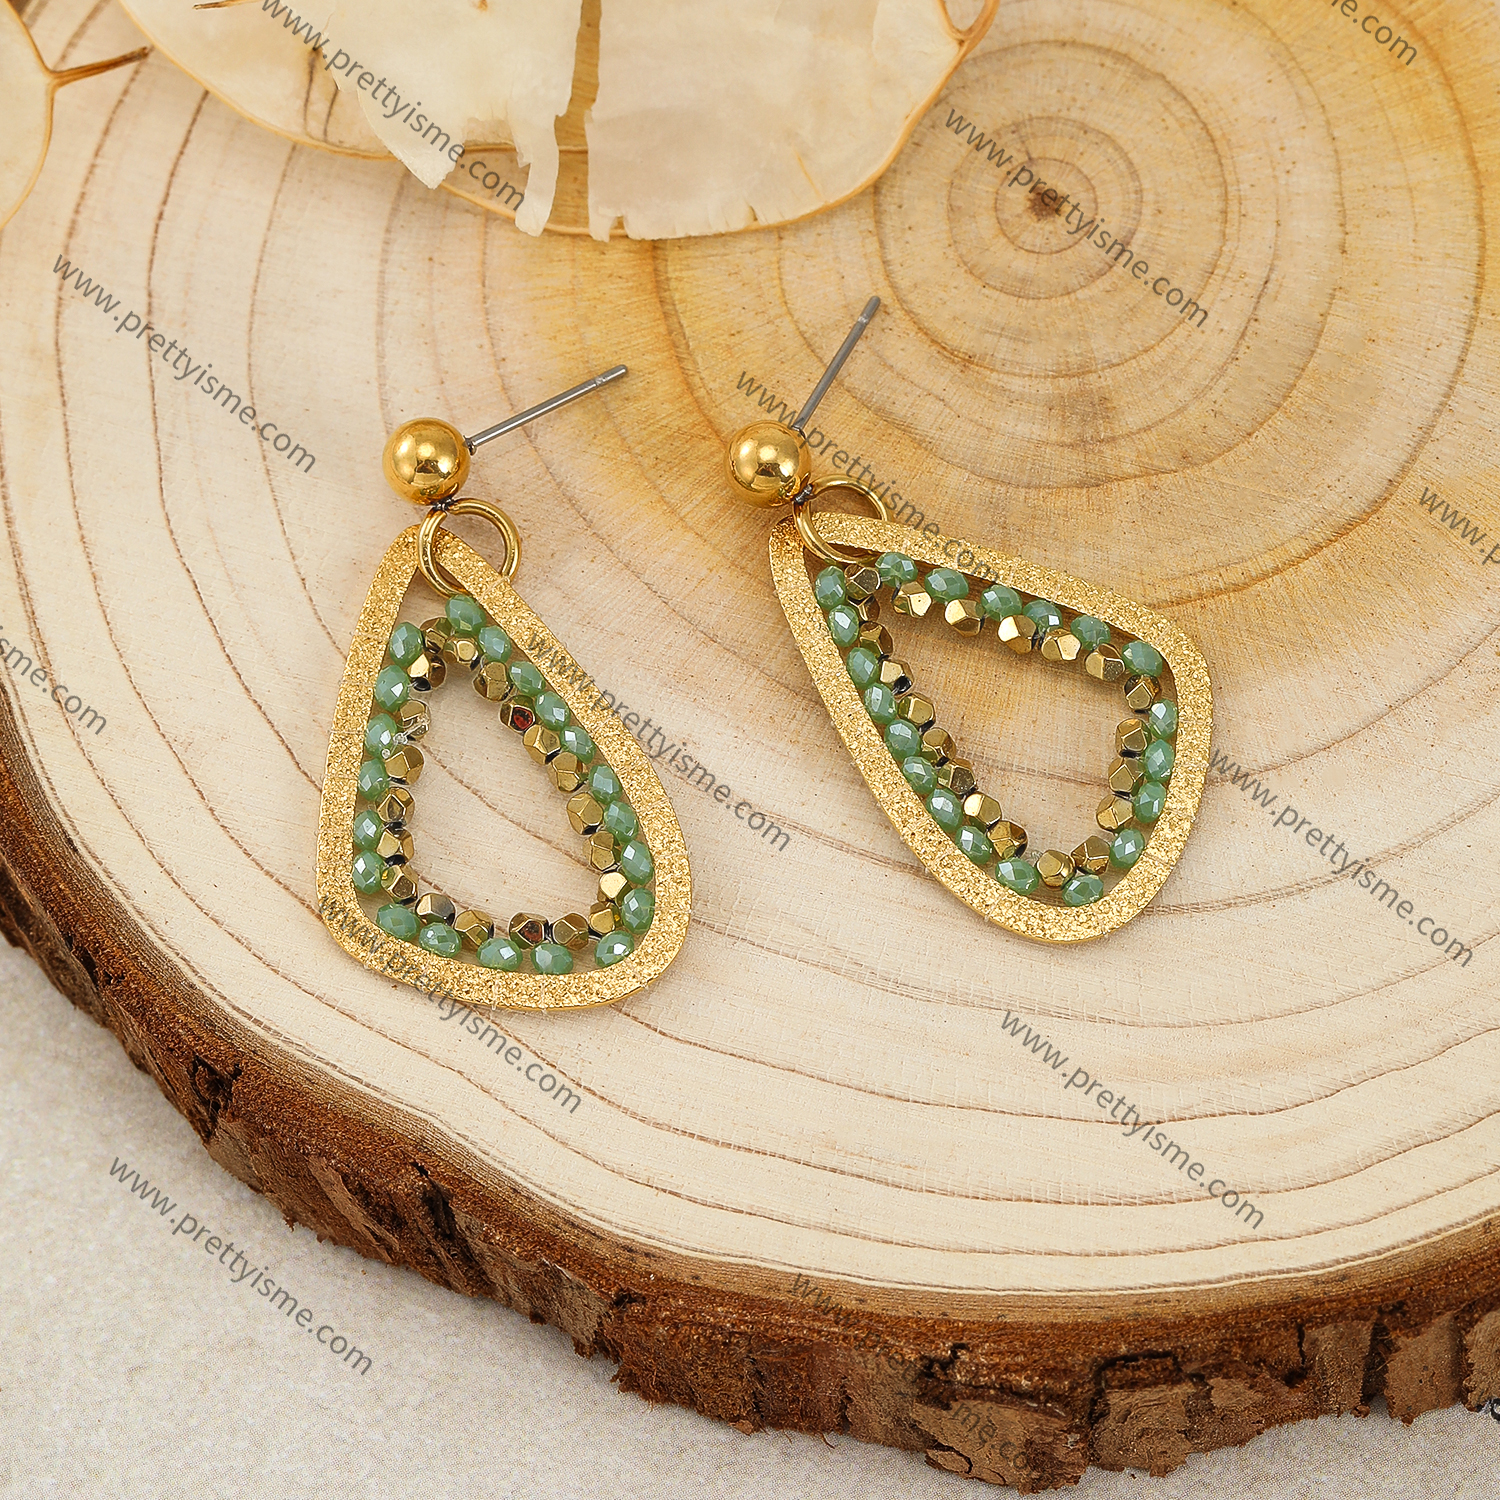 Oval Stainless Steel Earrings Gold Plated 18K with Green Beads.webp